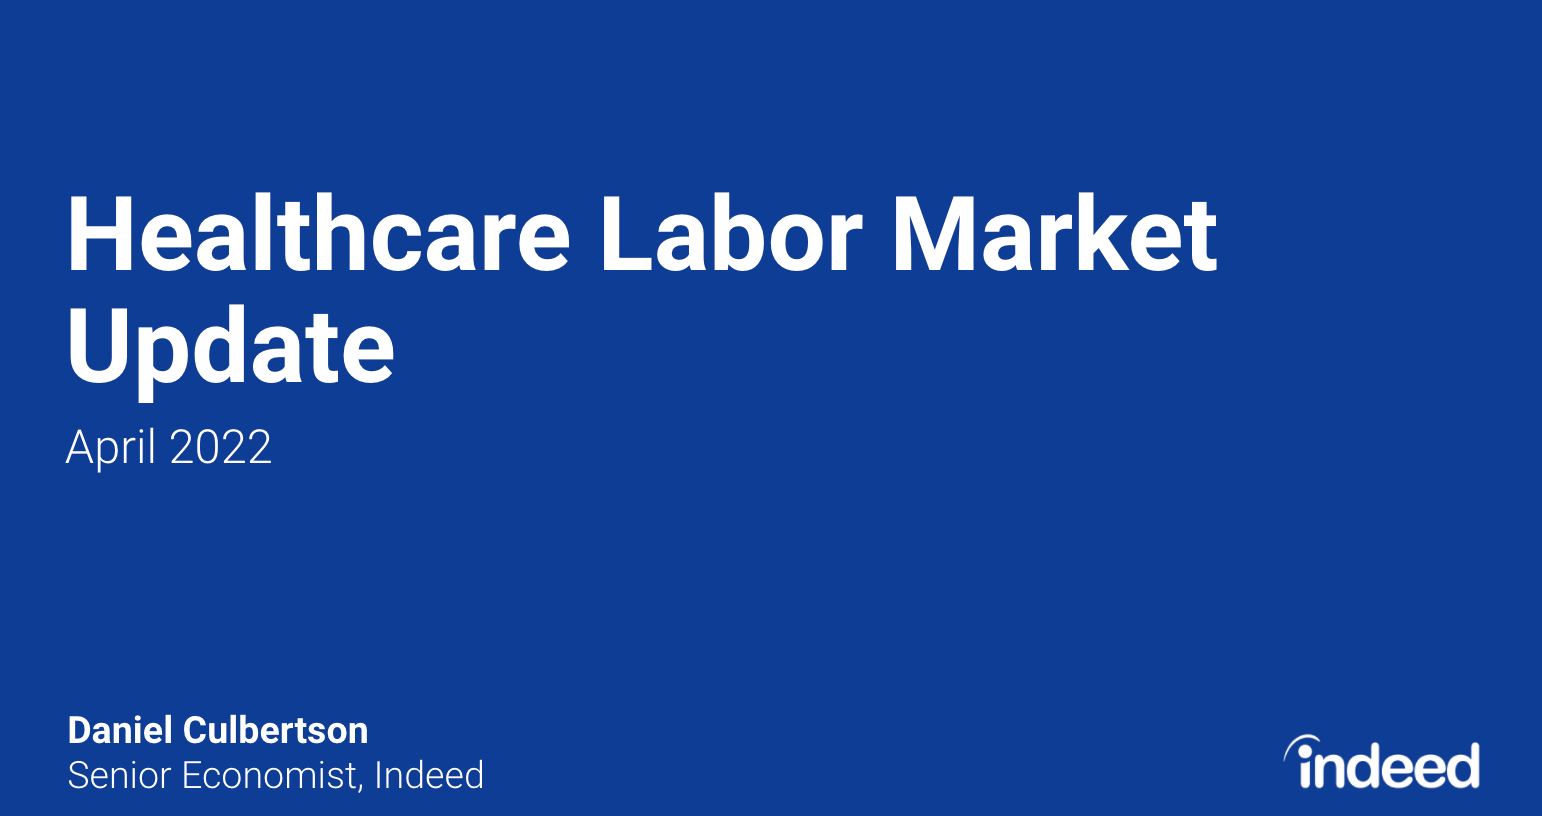 Header photo with the title "Healthcare Labor Market Update"